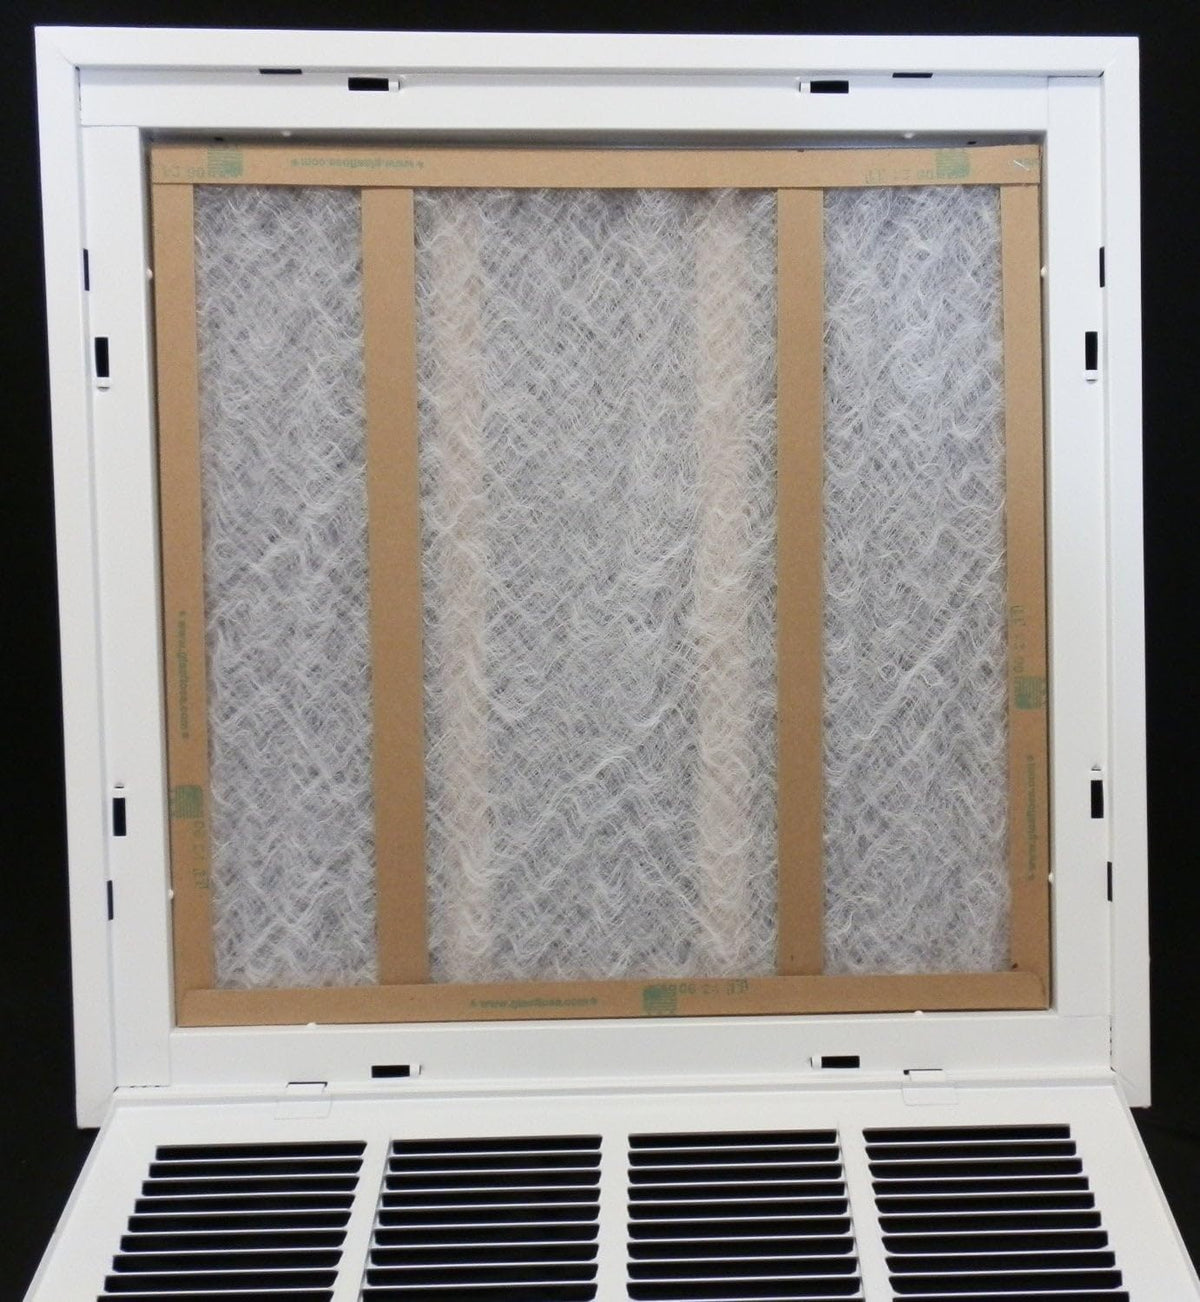 18&quot; X 12&quot; Steel Return Air Filter Grille for 1&quot; Filter - Removable Frame - * Filter Included * [Outer Dimensions: 20 5/8&quot; X 14 5/8&quot;]